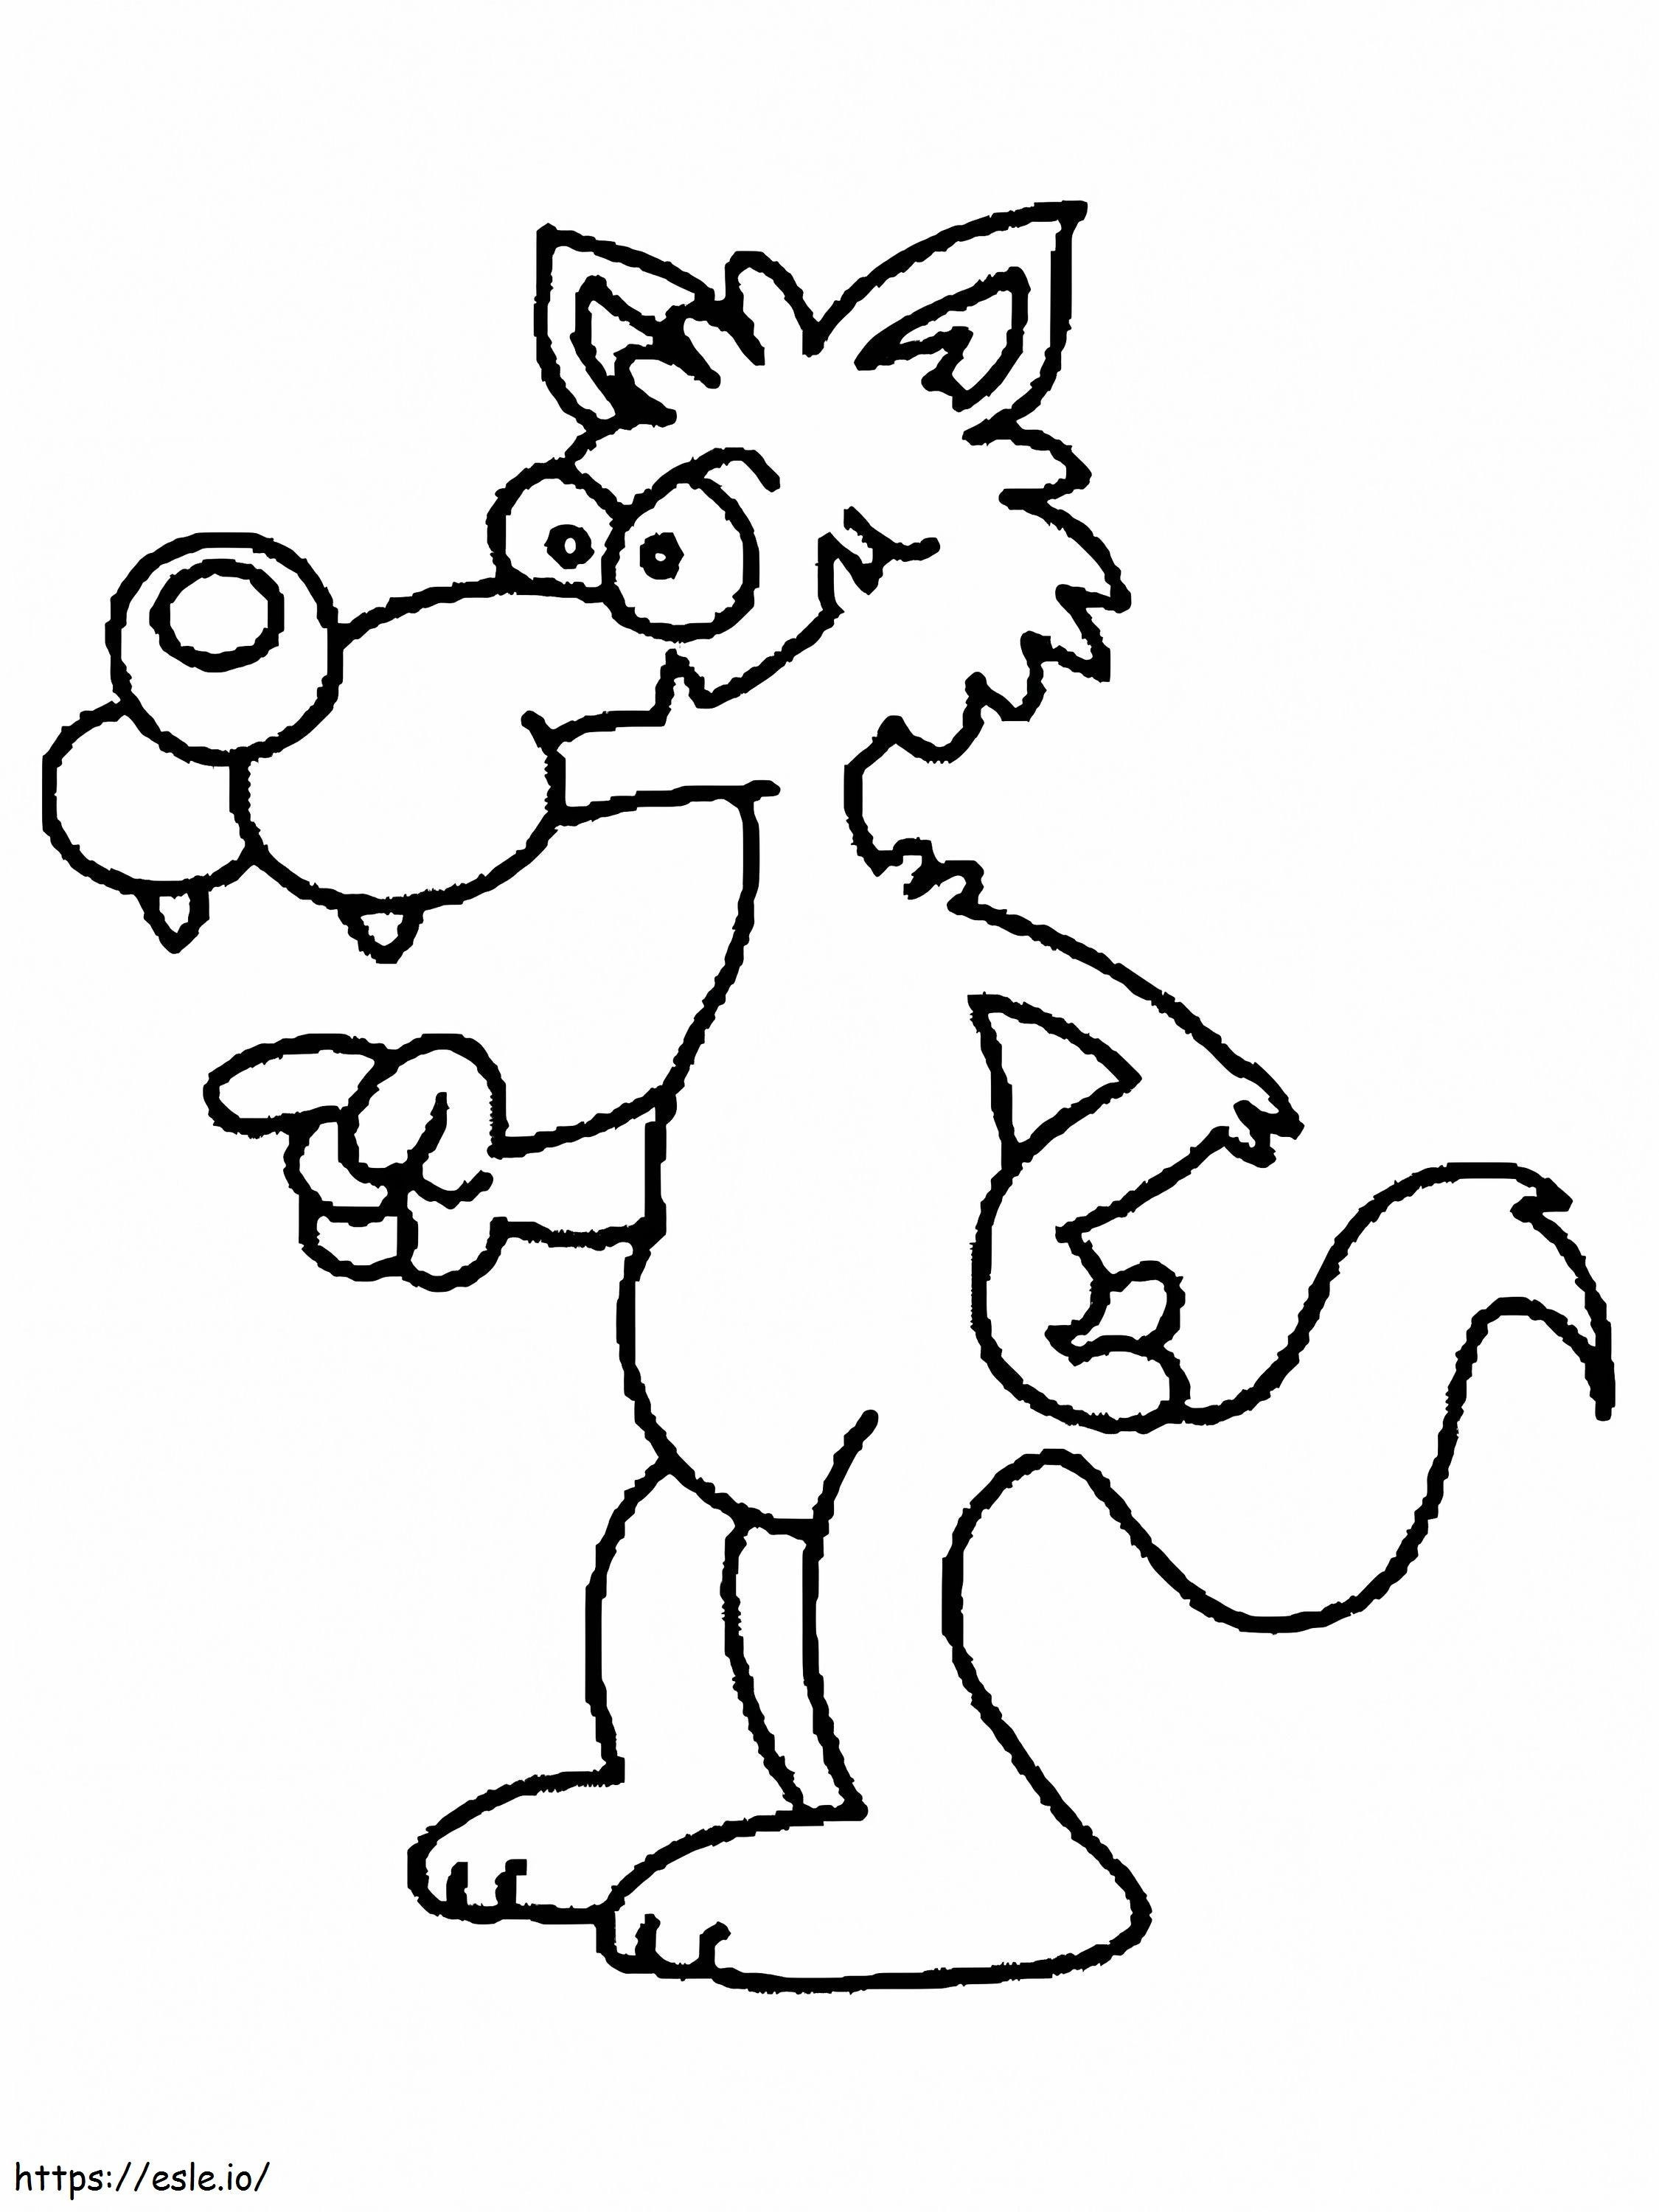 Bad Cartoon Wolf coloring page